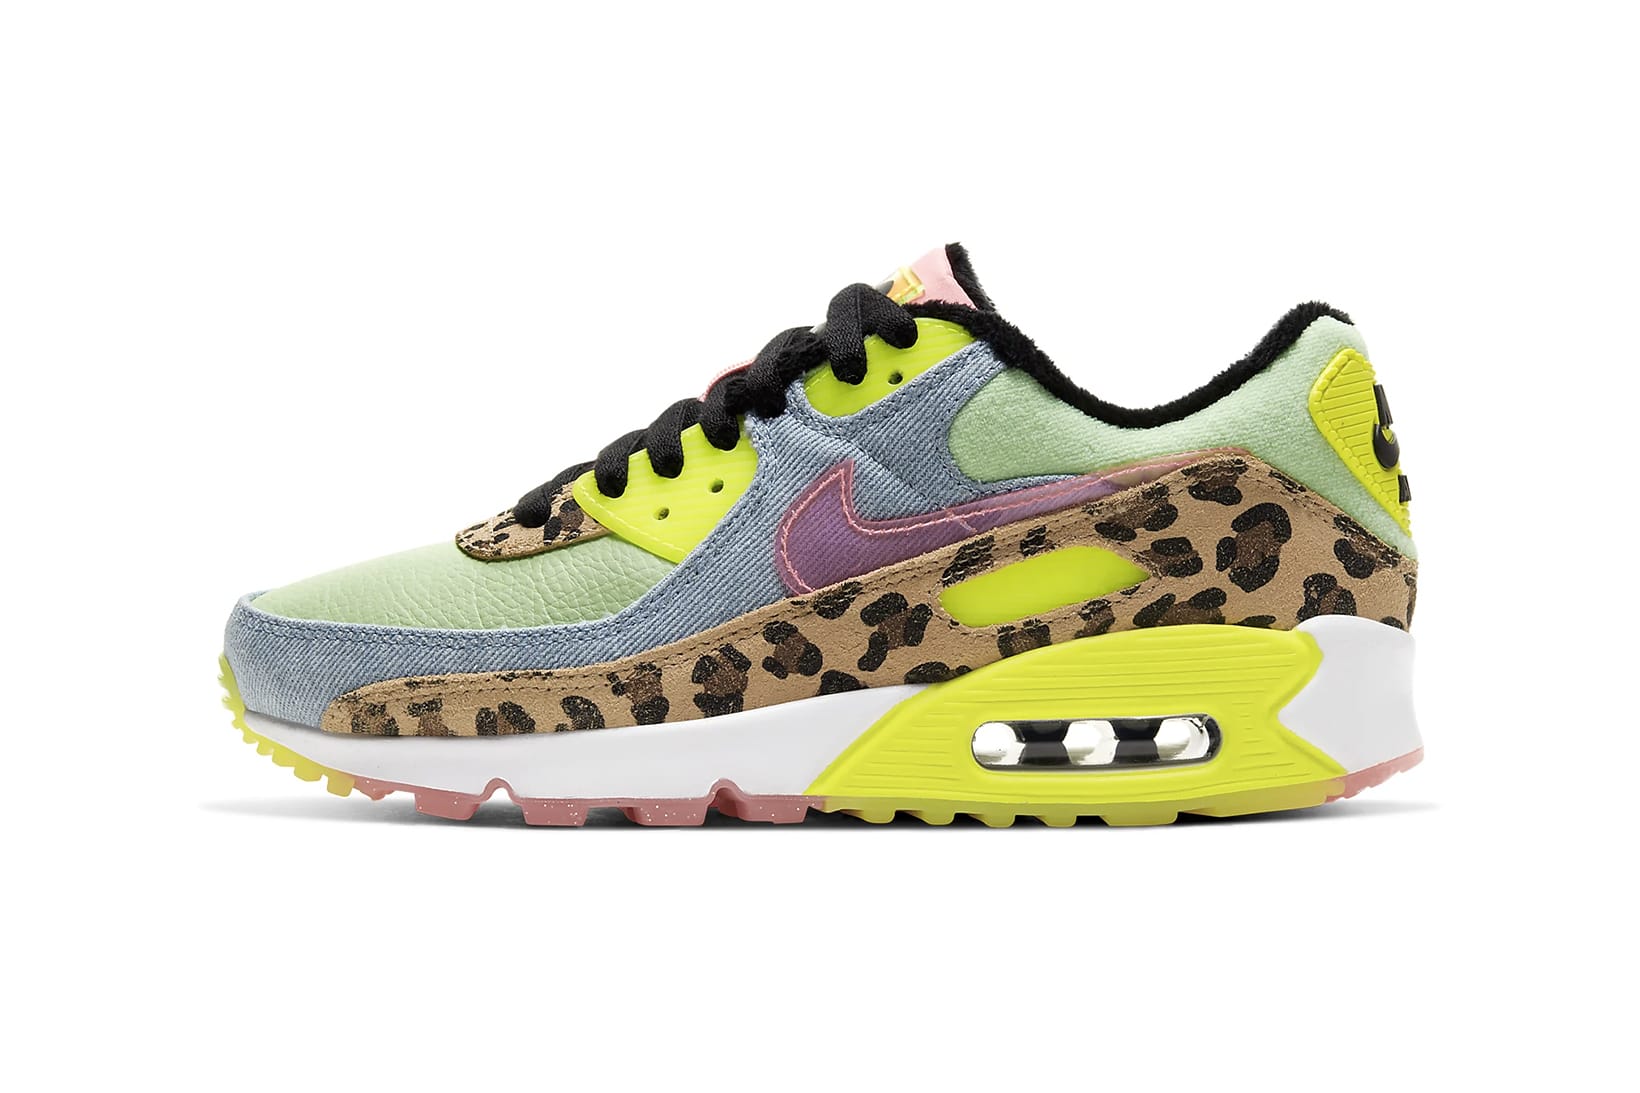 Nike Air Max 90 in Neon Green with 